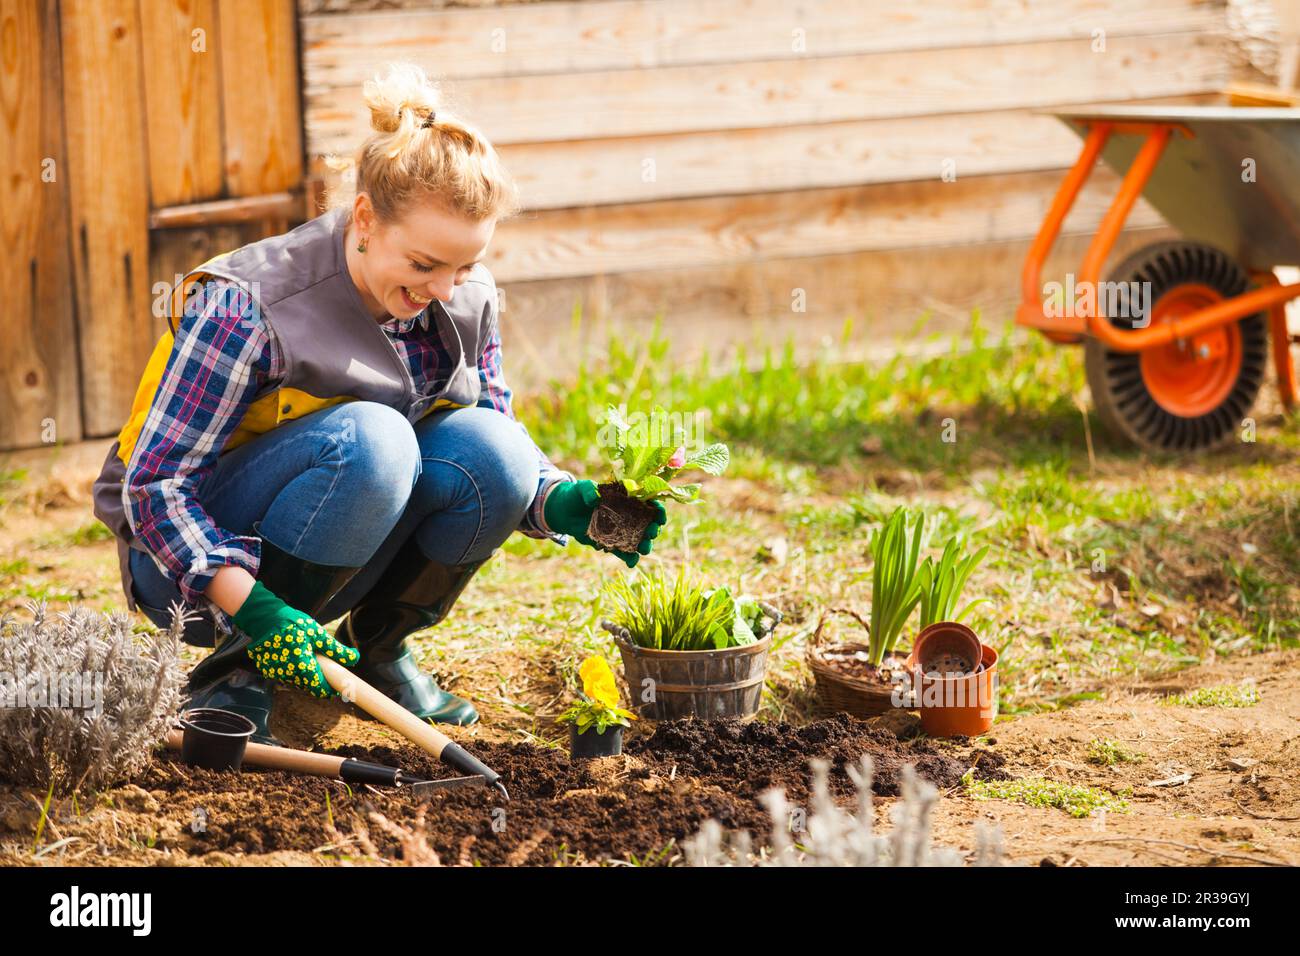 Cheerful blond woman planting flowers in garden Stock Photo